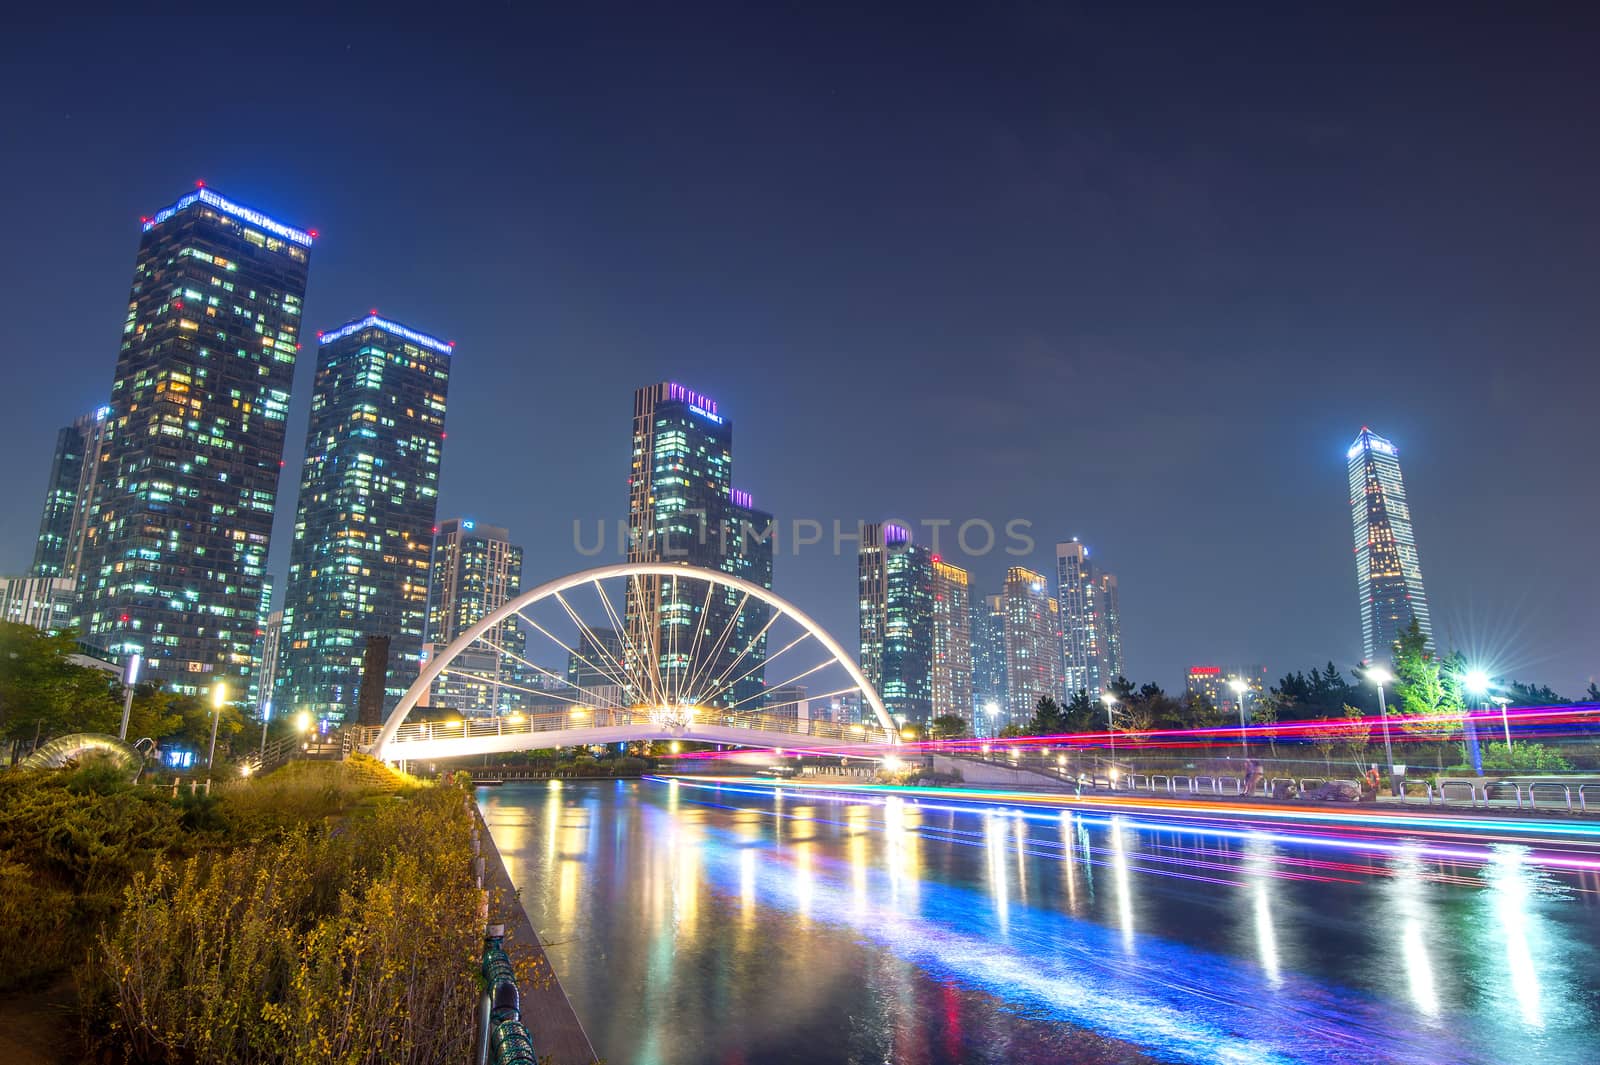 Songdo Central Park is the green space plan,inspired by NYC. by gutarphotoghaphy